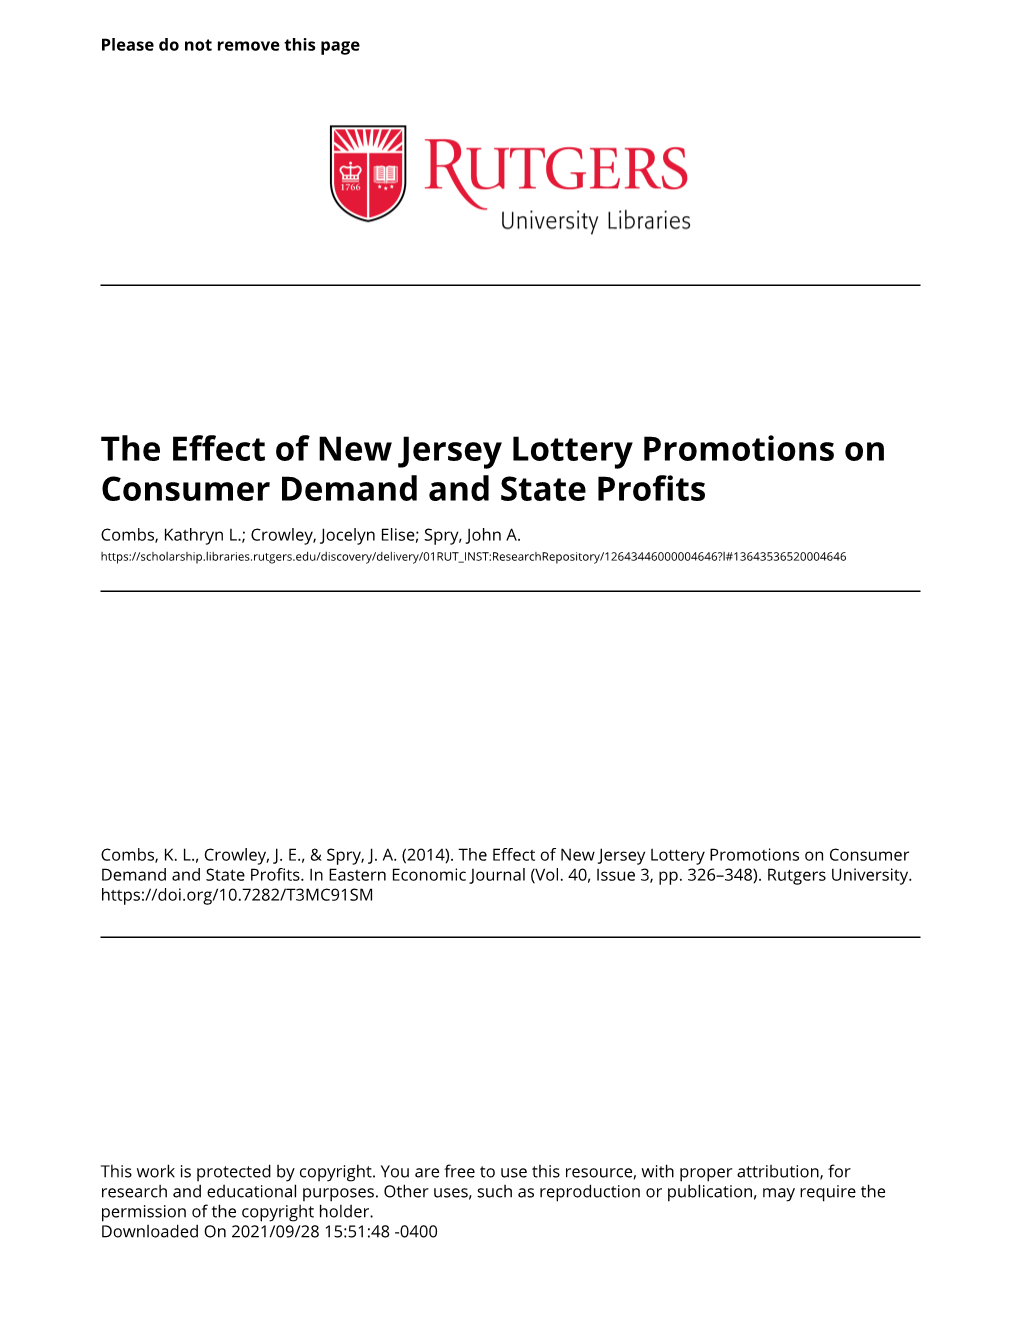 The Effect of New Jersey Lottery Promotions on Consumer Demand and State Profits